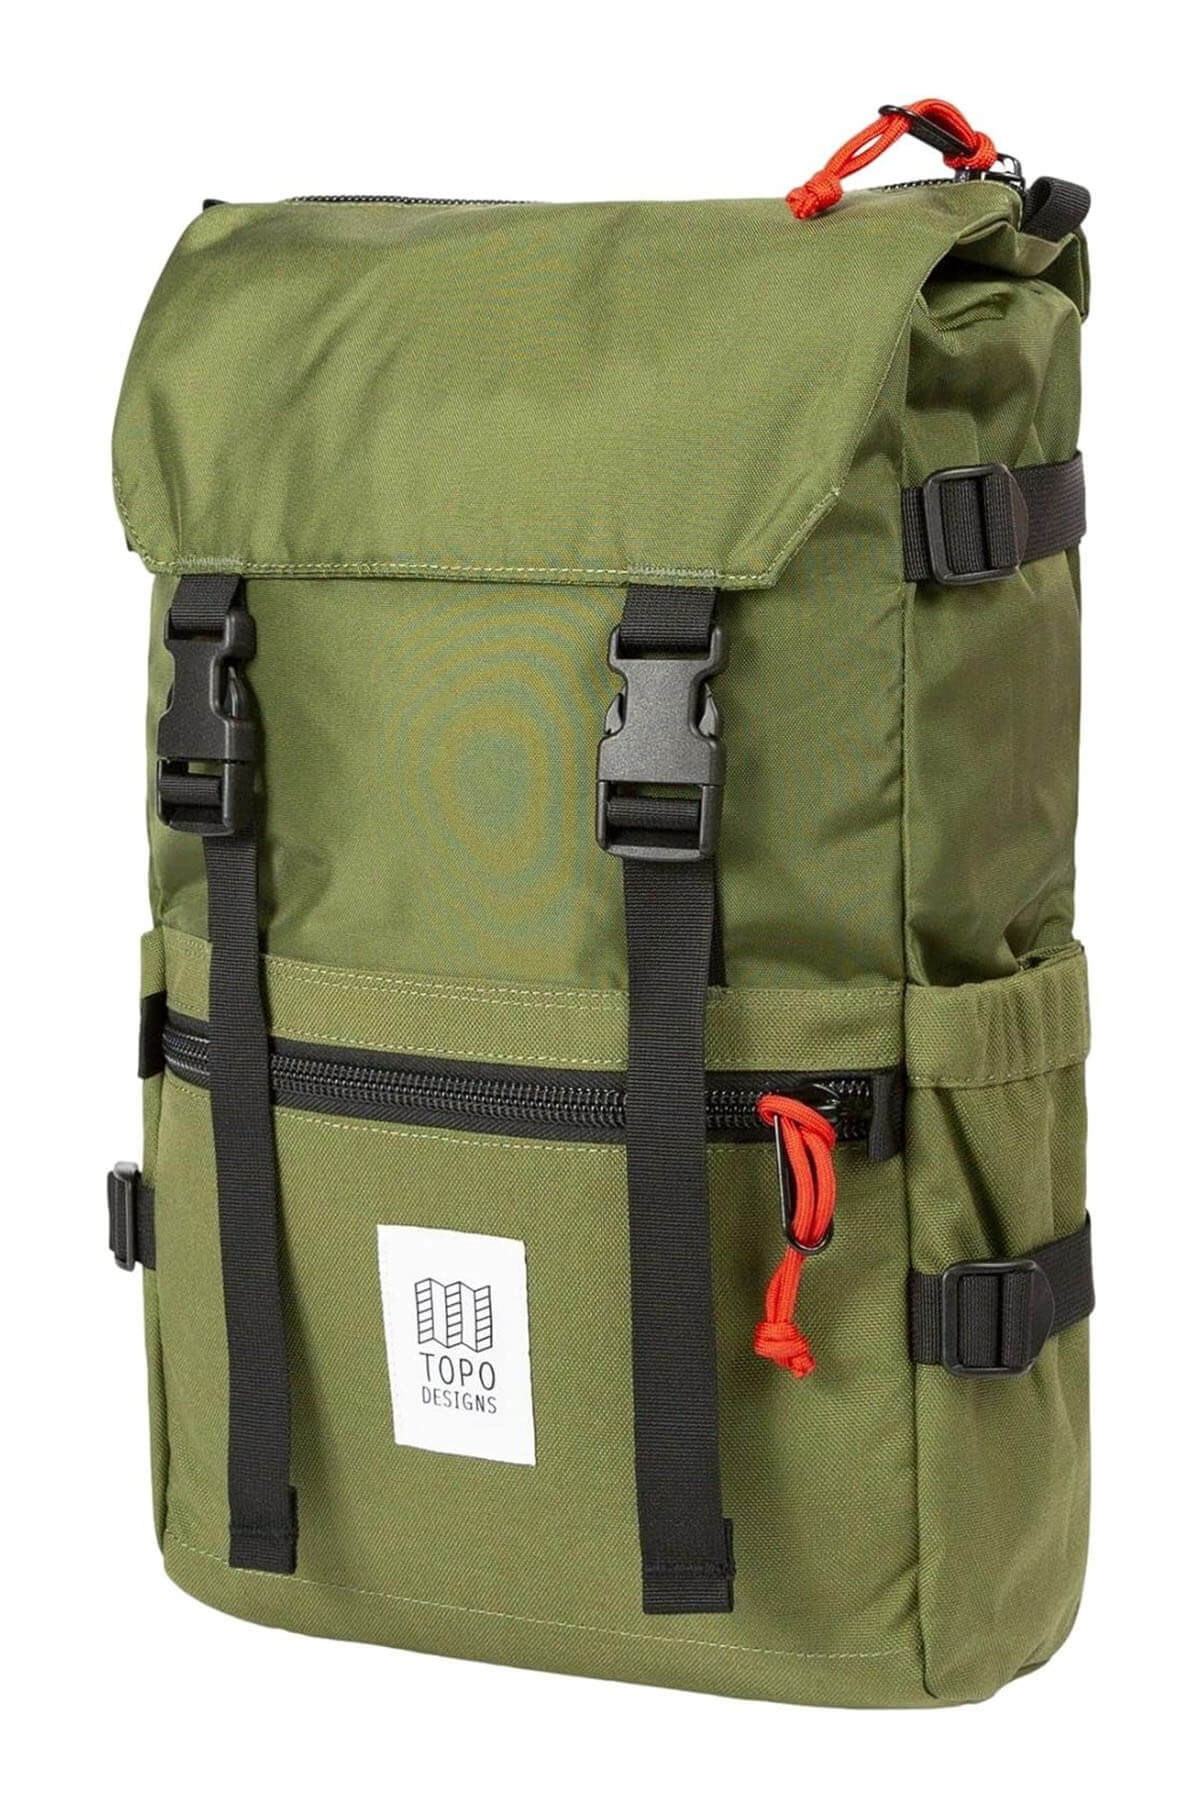 Topo Designs rover pack classic in olive